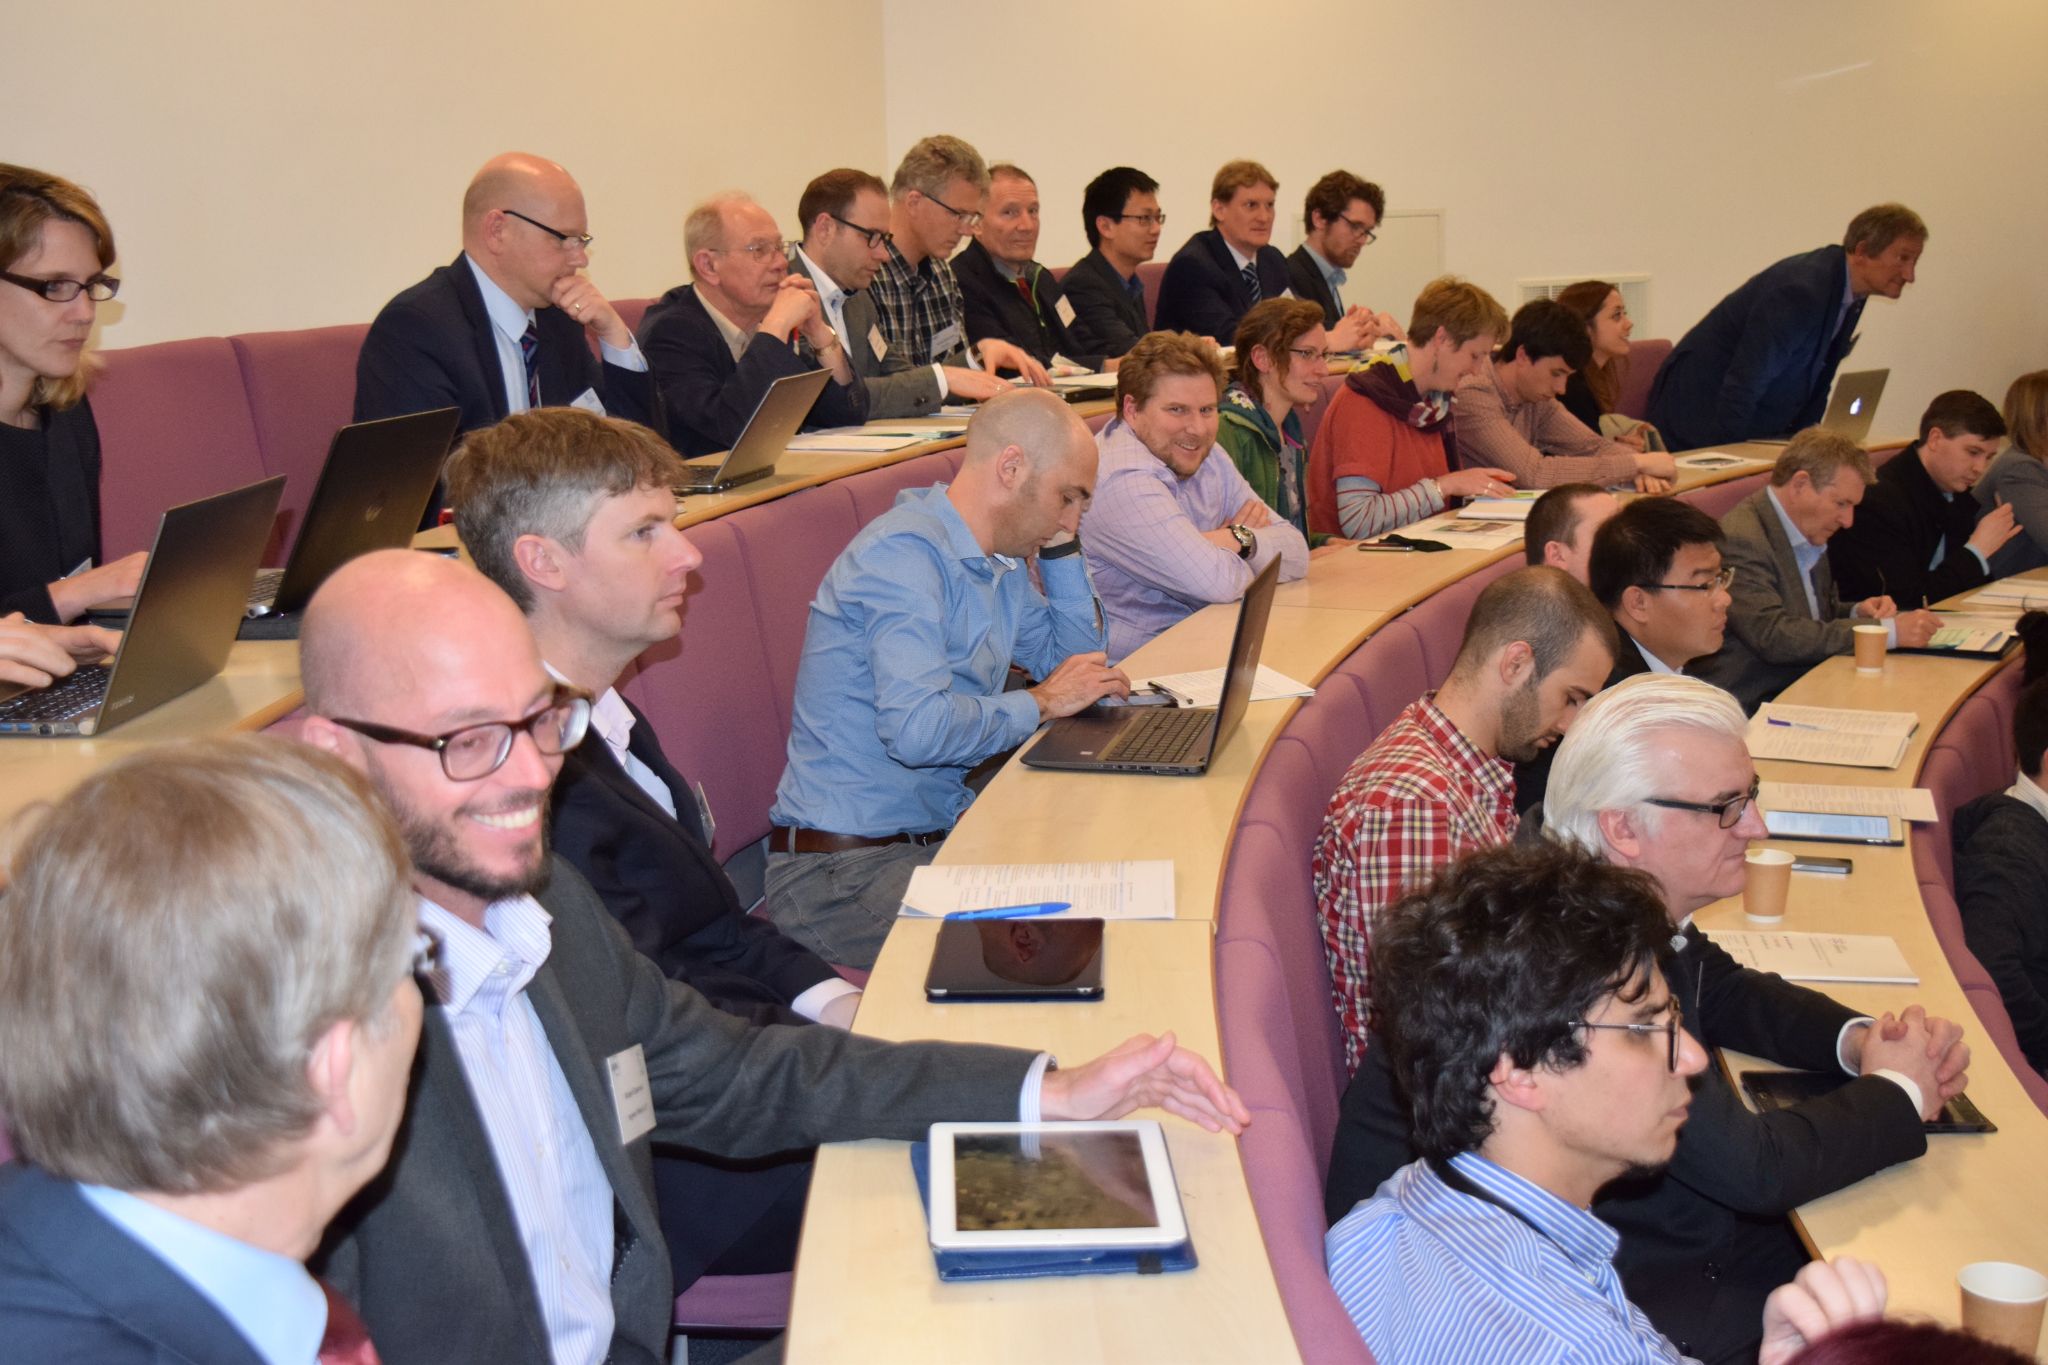 Resilience to climate change leads debate at CIBSE Technical Symposium